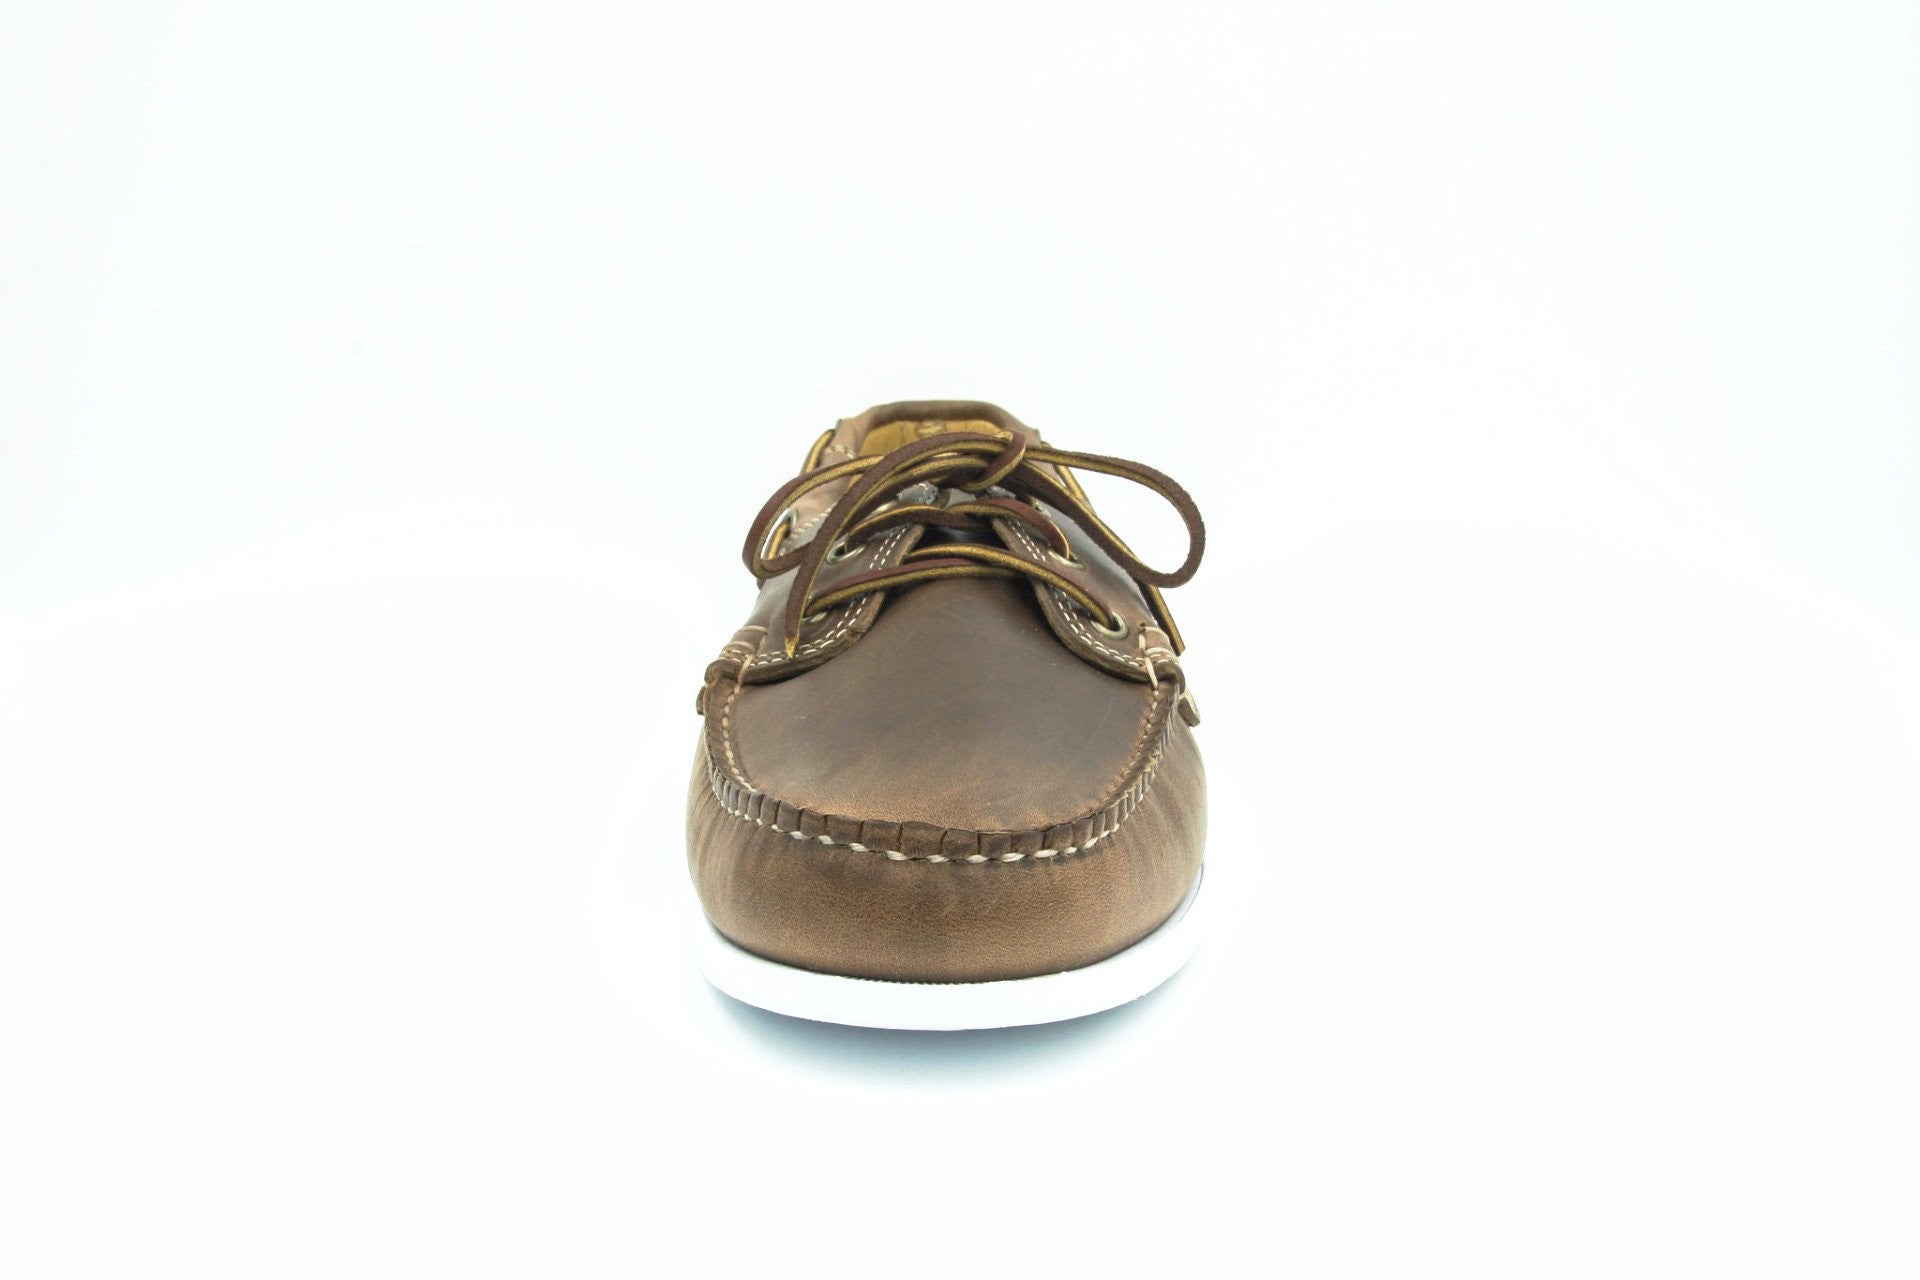 Quoddy Boat Shoes, Chromexcel Natural